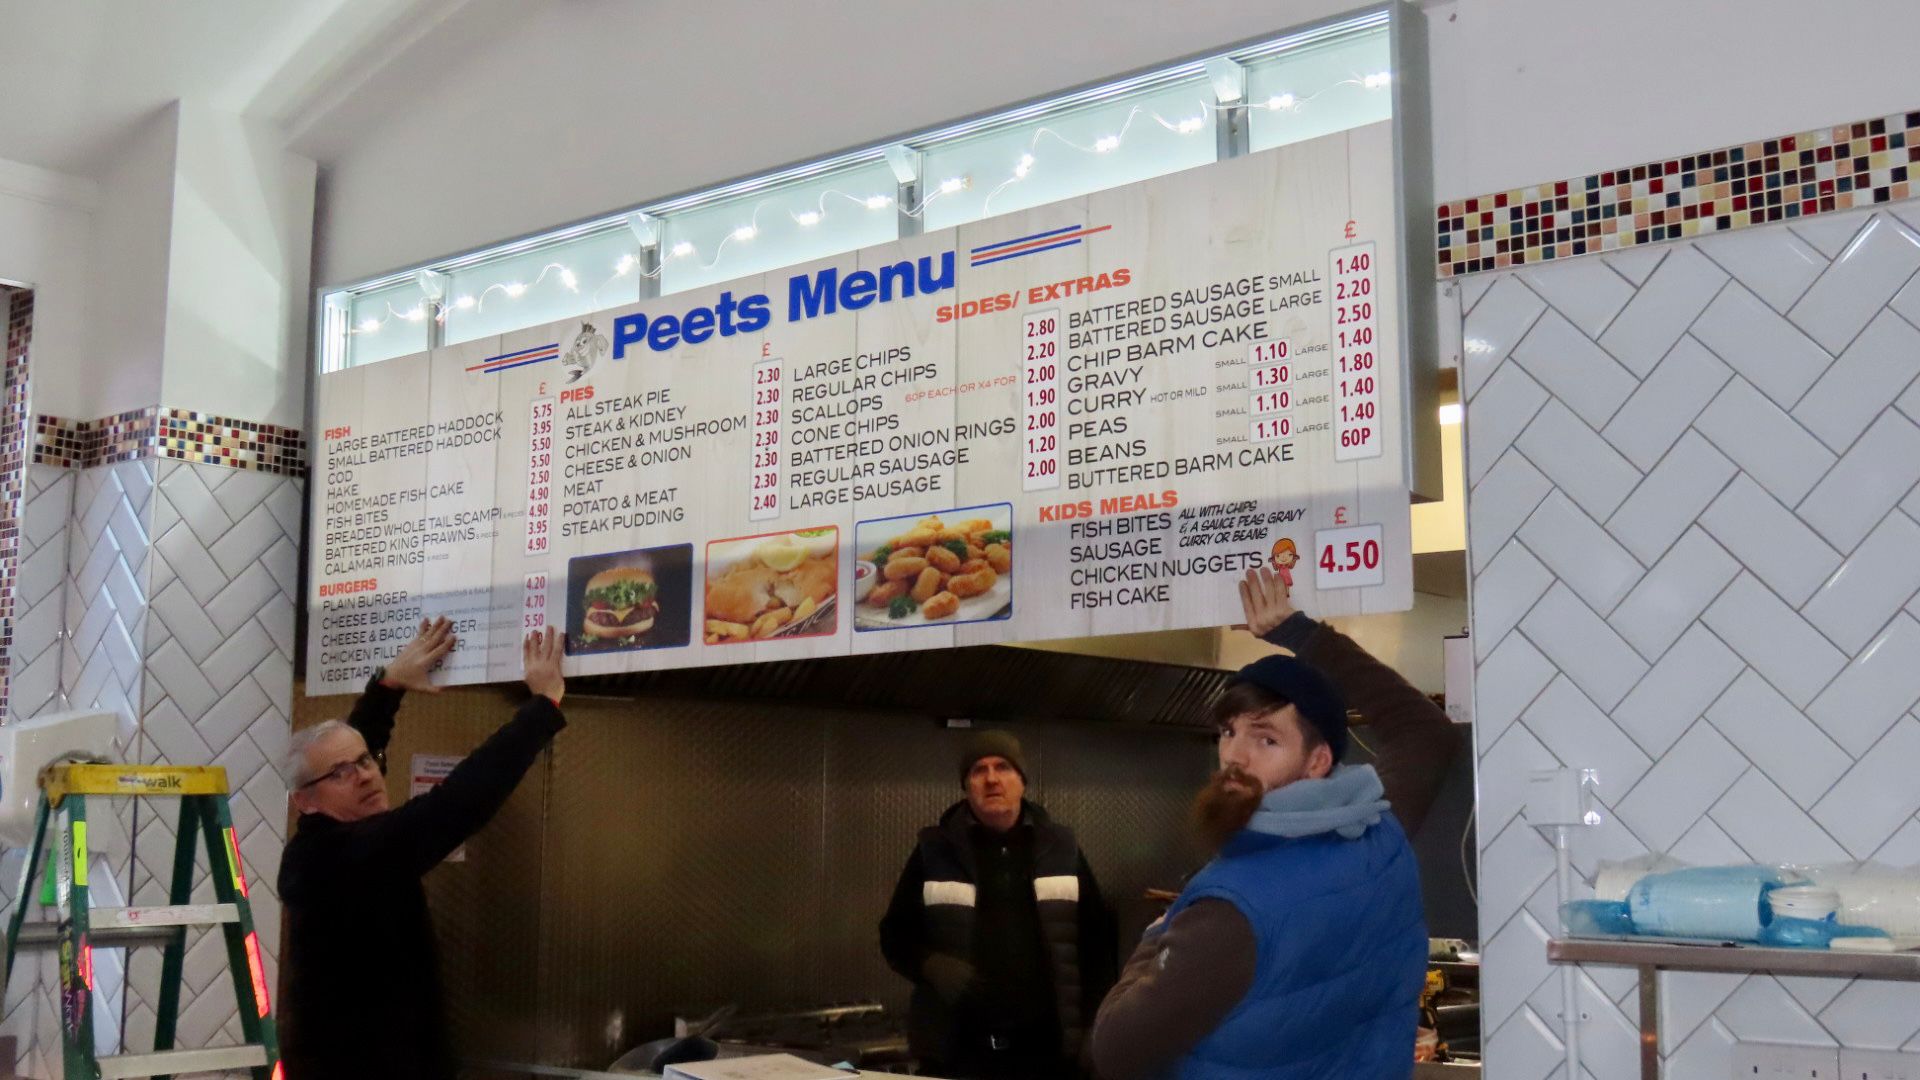 Peet's Traditional Fish and Chips, owned by Kevin and Nicola Peet, is opening on Station Road in Hesketh Bank. Photo by Andrew Brown Media